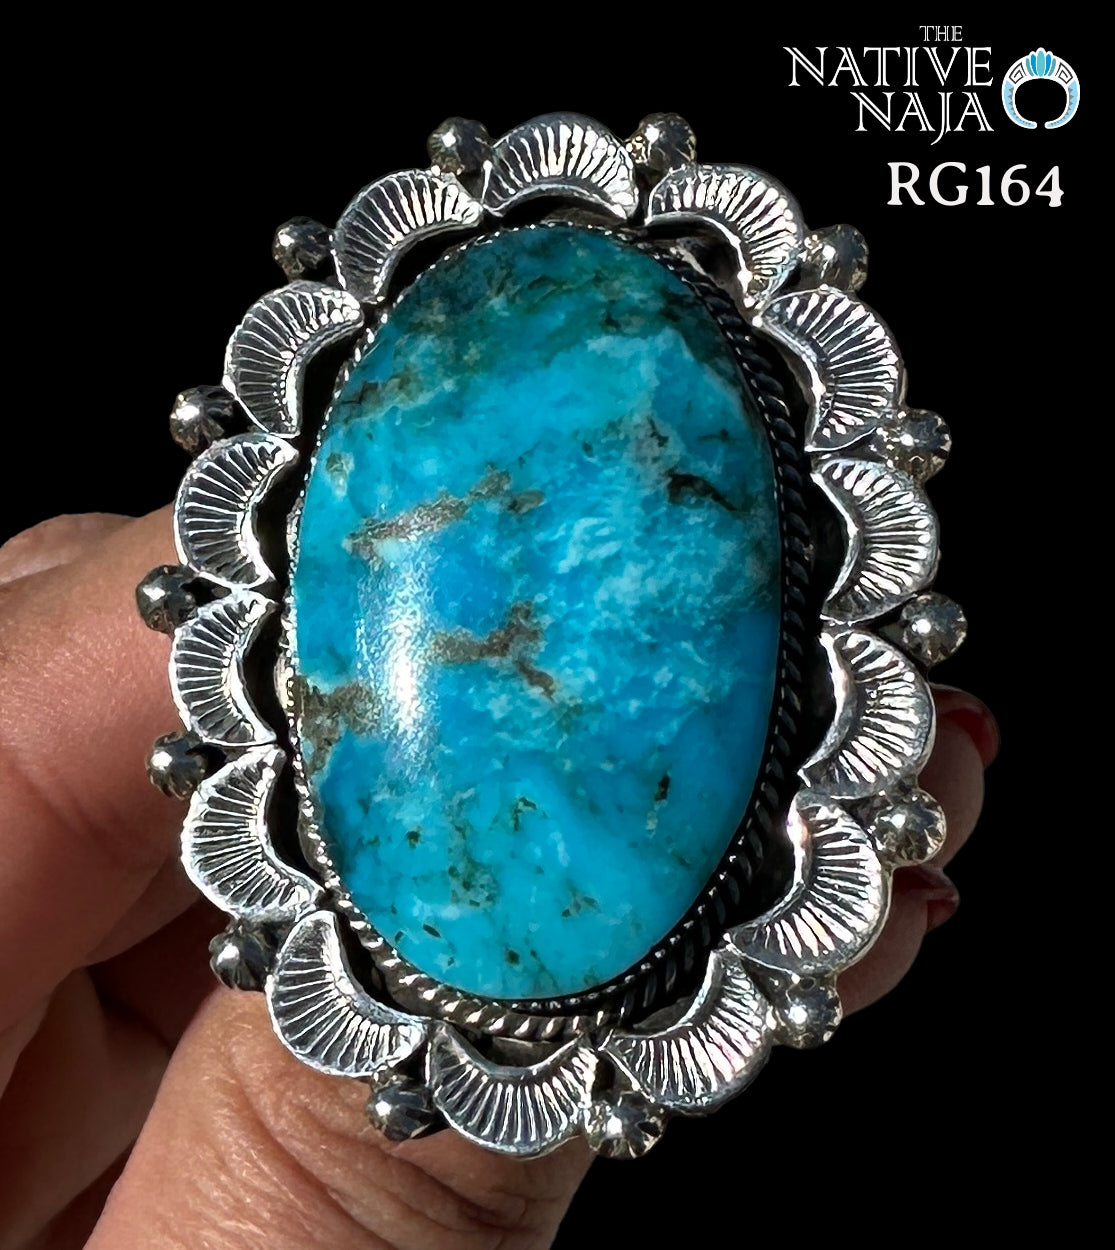 Large Navajo Loretta Delgarito Oval Turquoise & Sterling Silver Ring Size 6 3/4 RG164